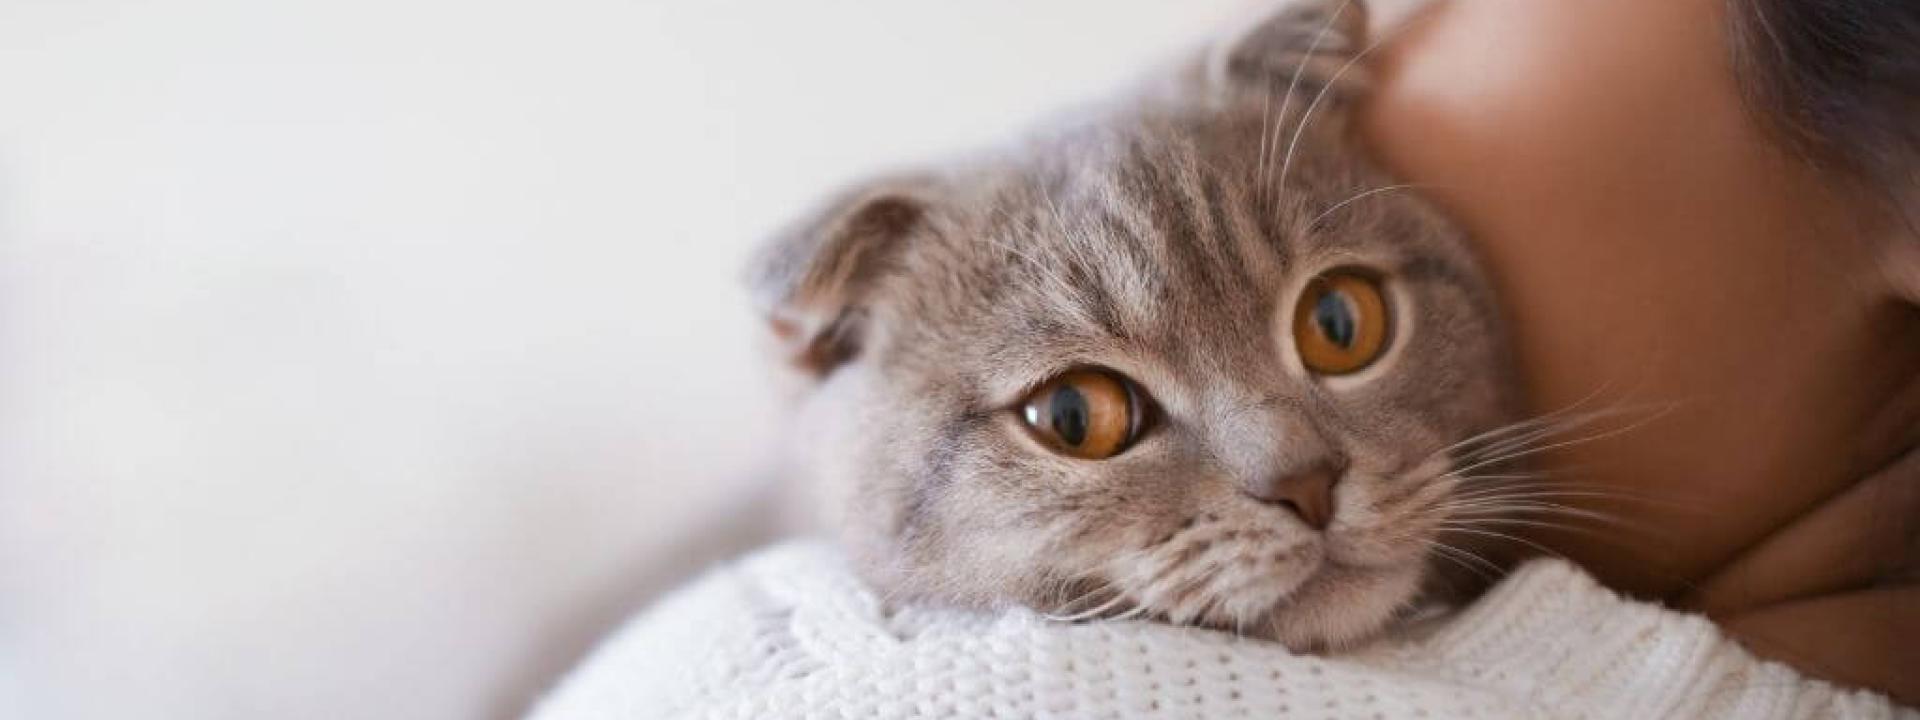 6 Reasons for Cat Drooling, from Sickness to Stress